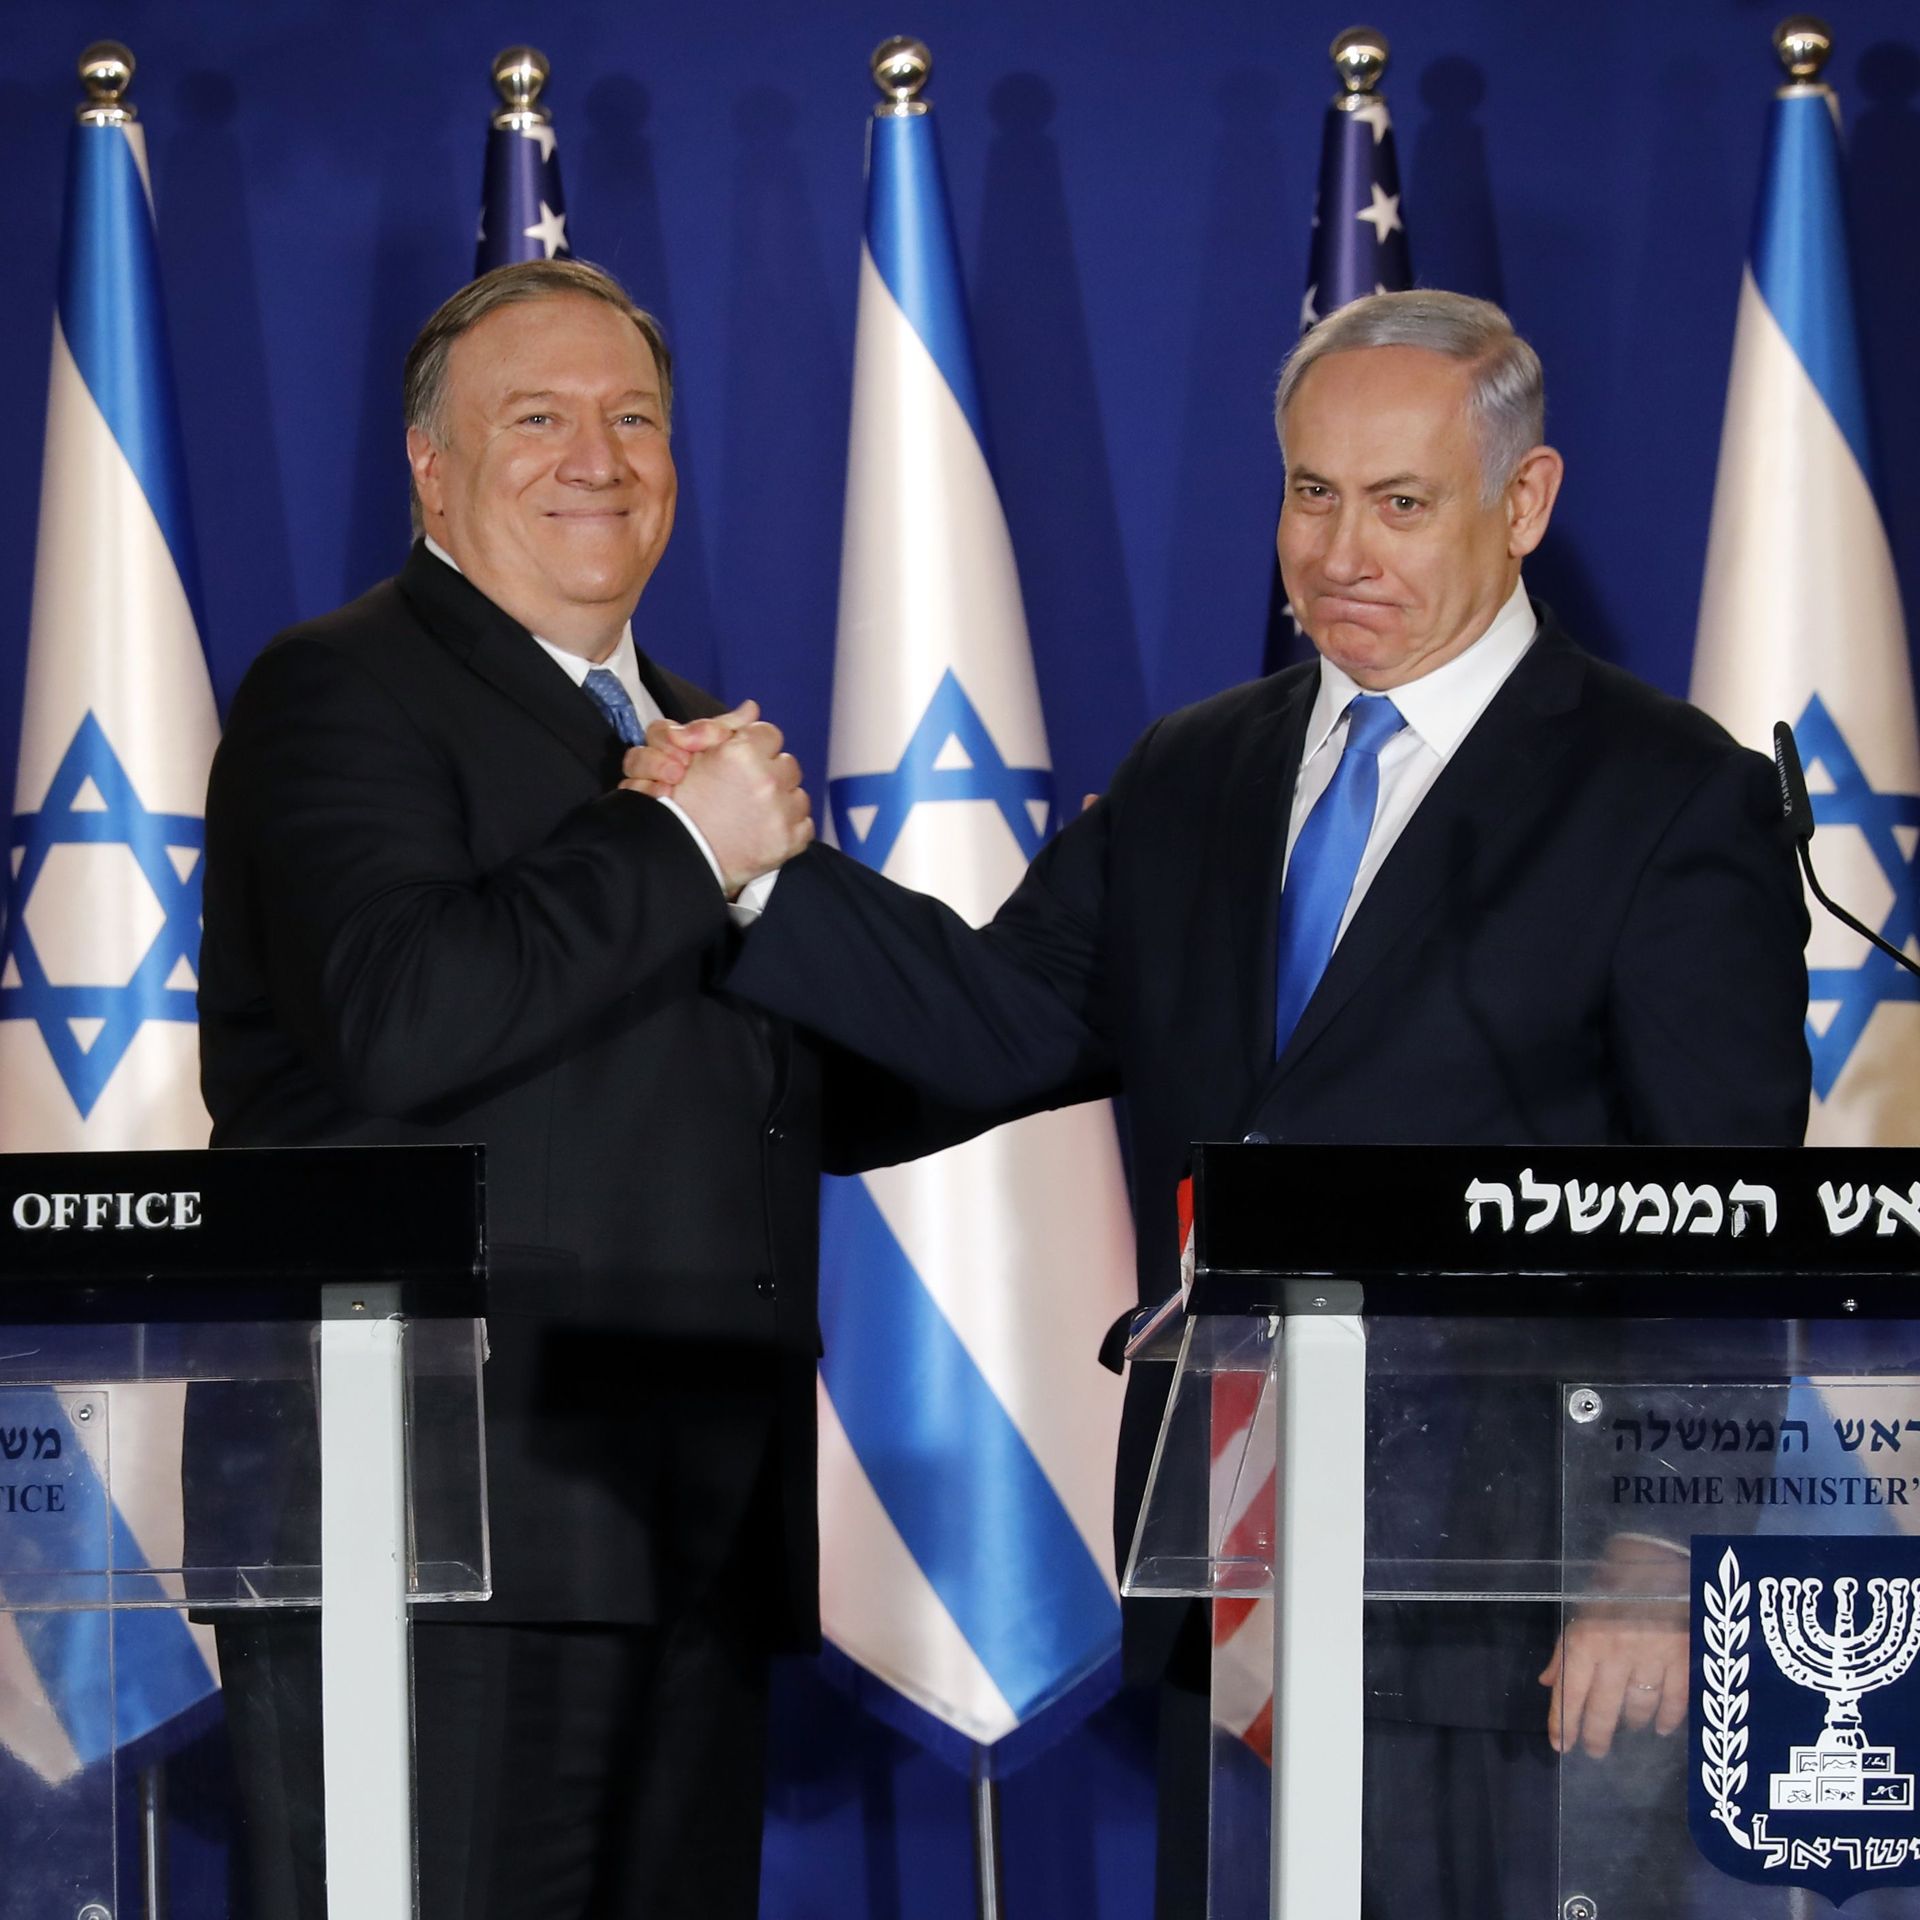 Mike Pompeo and the Israeli prime minister shake hands in front of a row of Israel and American flags, standing behind two podiums. 